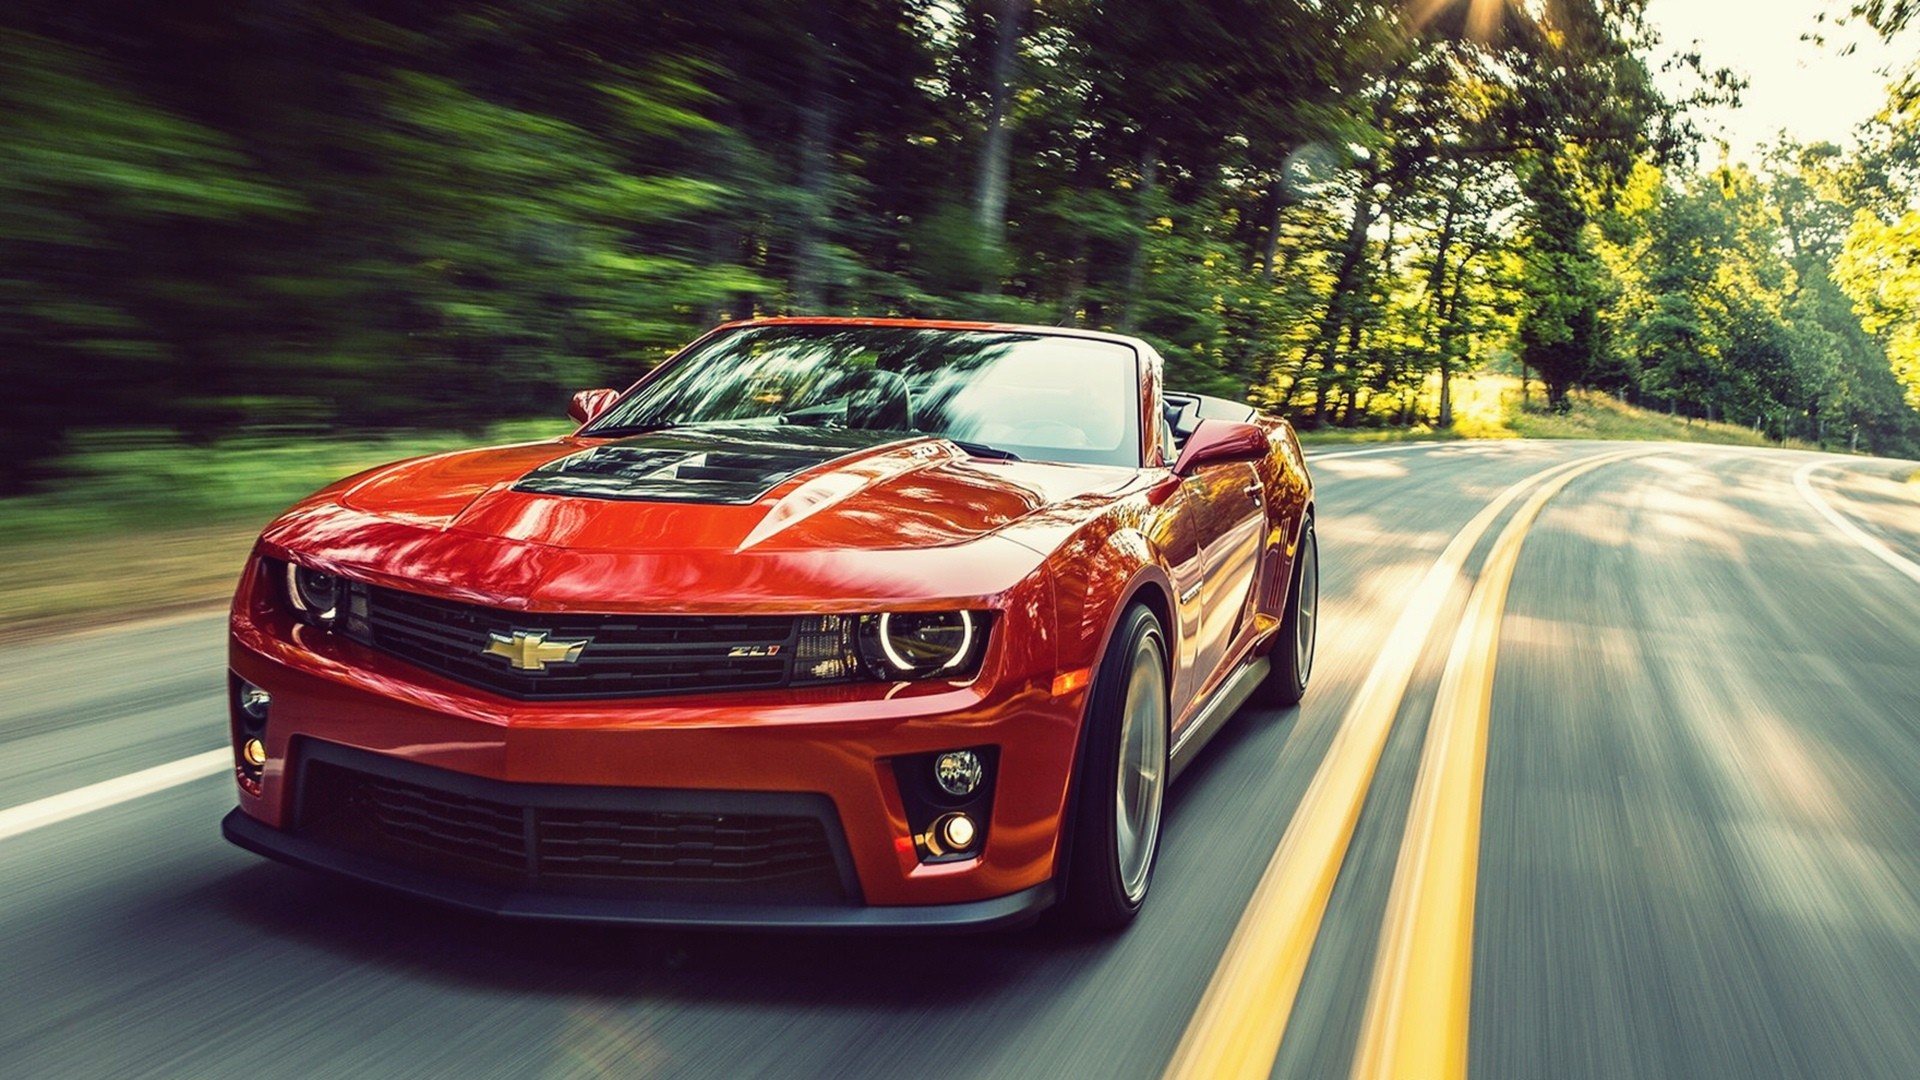 Chevrolet Camaro Zl1 HD Wallpaper And Background